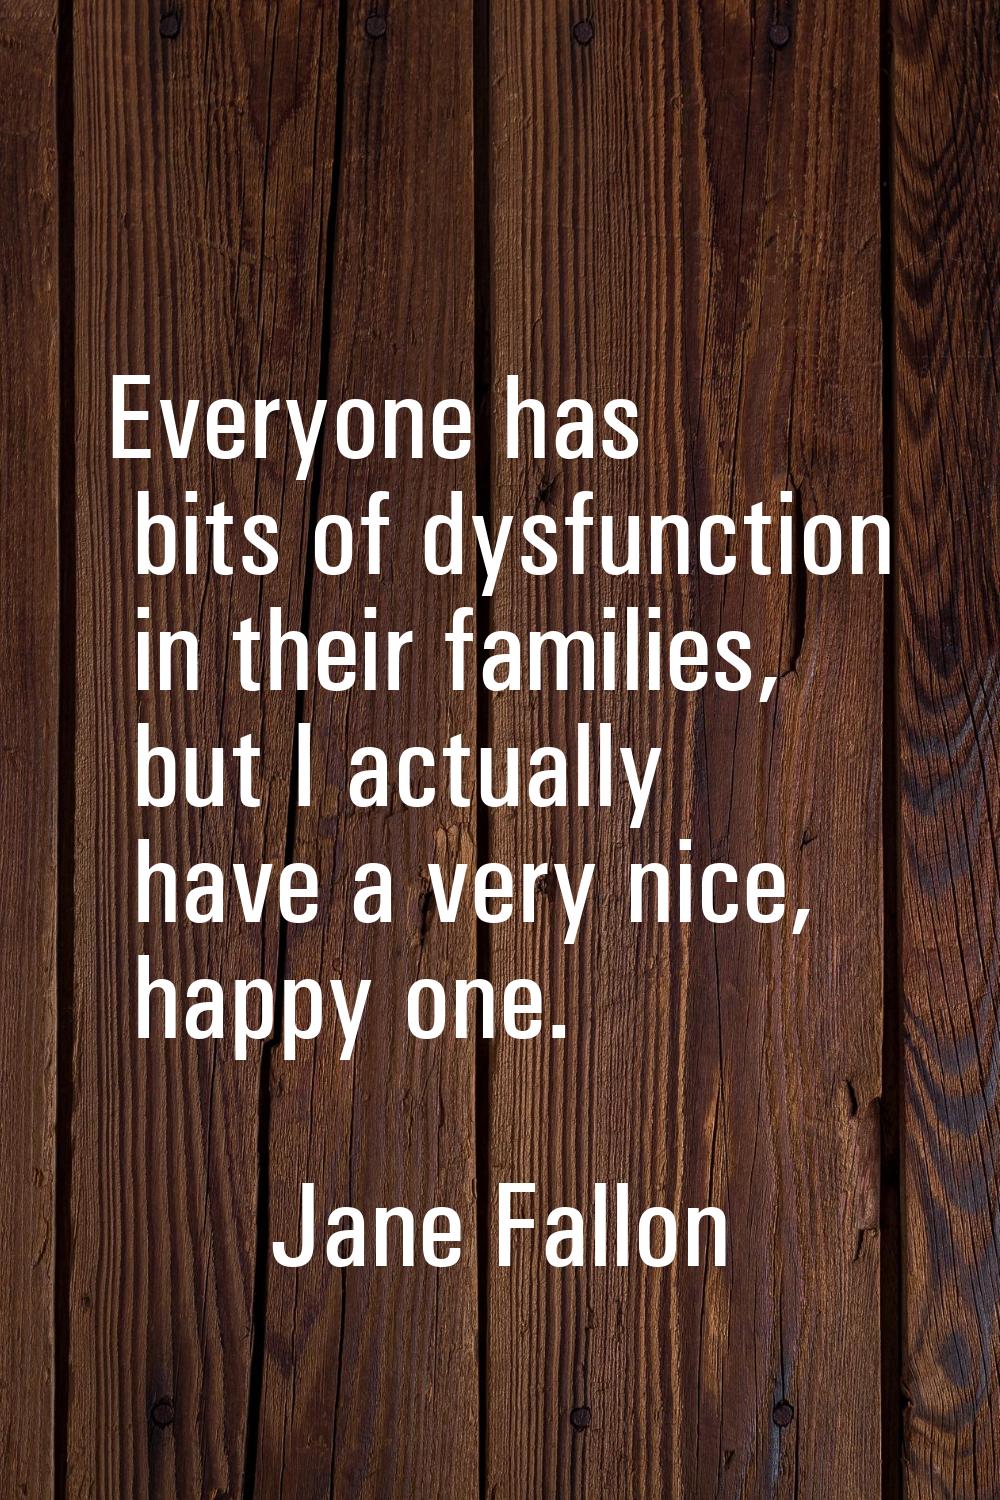 Everyone has bits of dysfunction in their families, but I actually have a very nice, happy one.